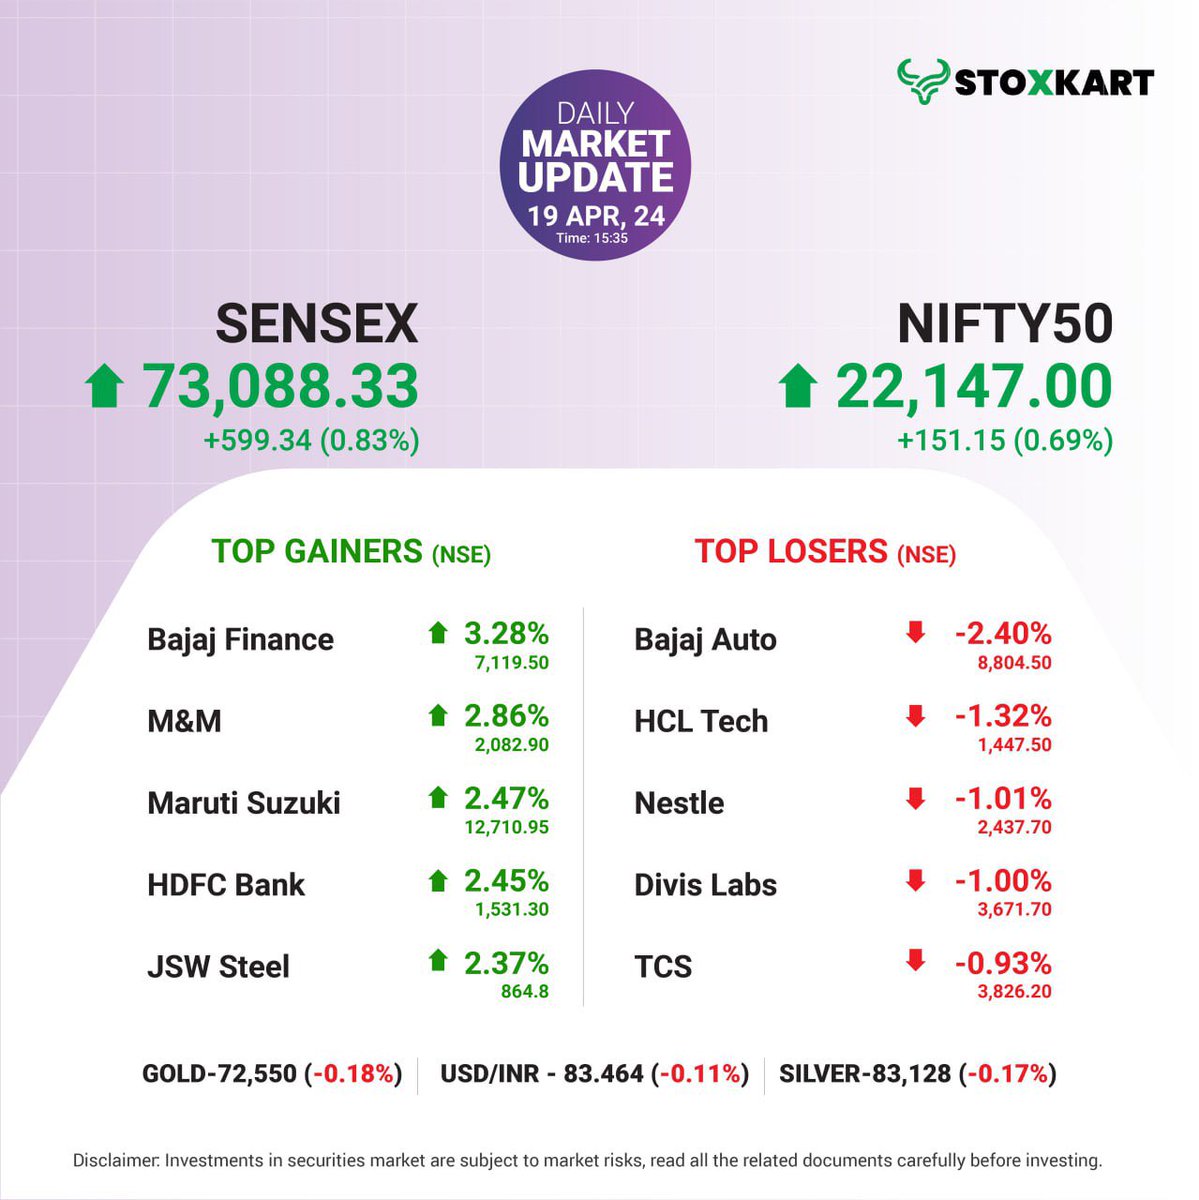 #dailymarketupdate

Presenting the top 5 gainers and top 5 losers from today’s Nifty 50 index.
Have you invested in any of these?

Let us know in the comments below!

#stoxkart #stoxkartapp #tradewithstoxkart #investwithstoxkart #stocknews #stockmarketupdate #trading #stocktrade